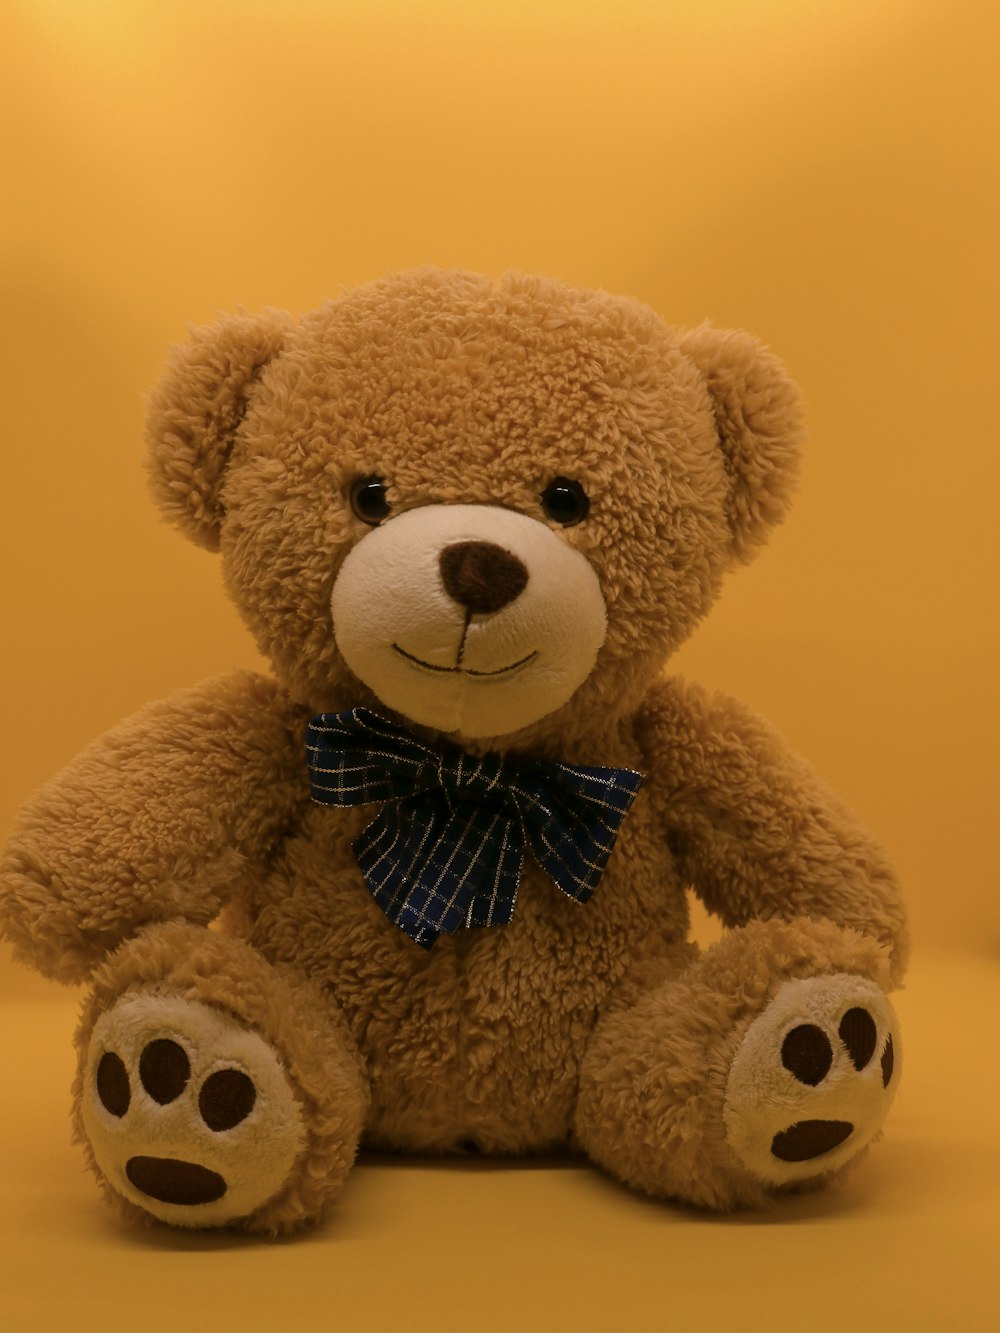 brown teddy bear with black and white bow tie